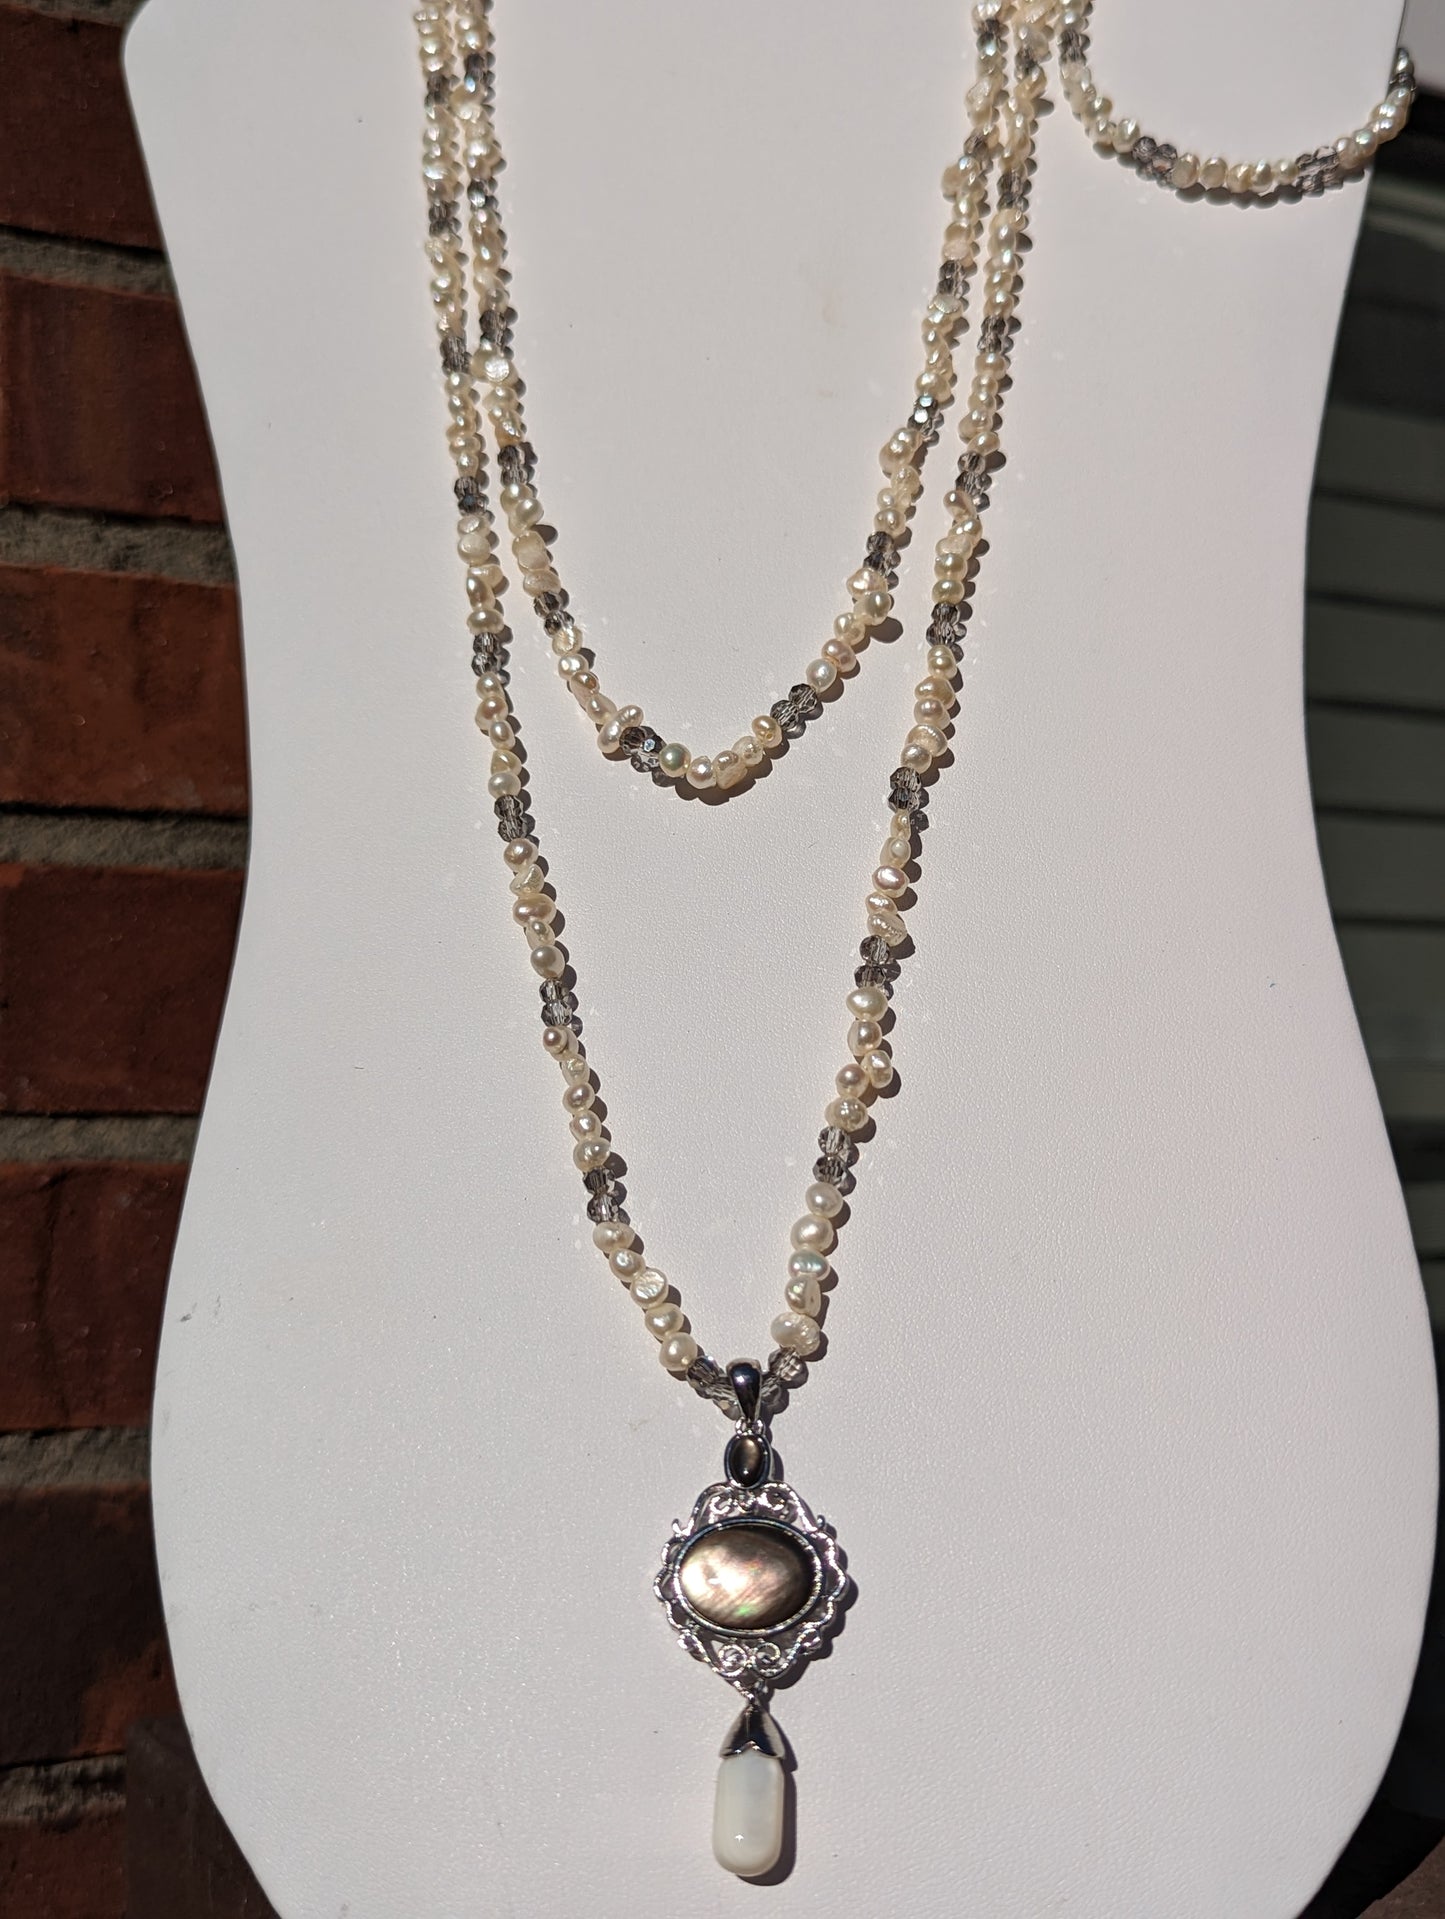 Victorian Freshwater Pearl and Swarovski Bead Necklace and Long Bracelet